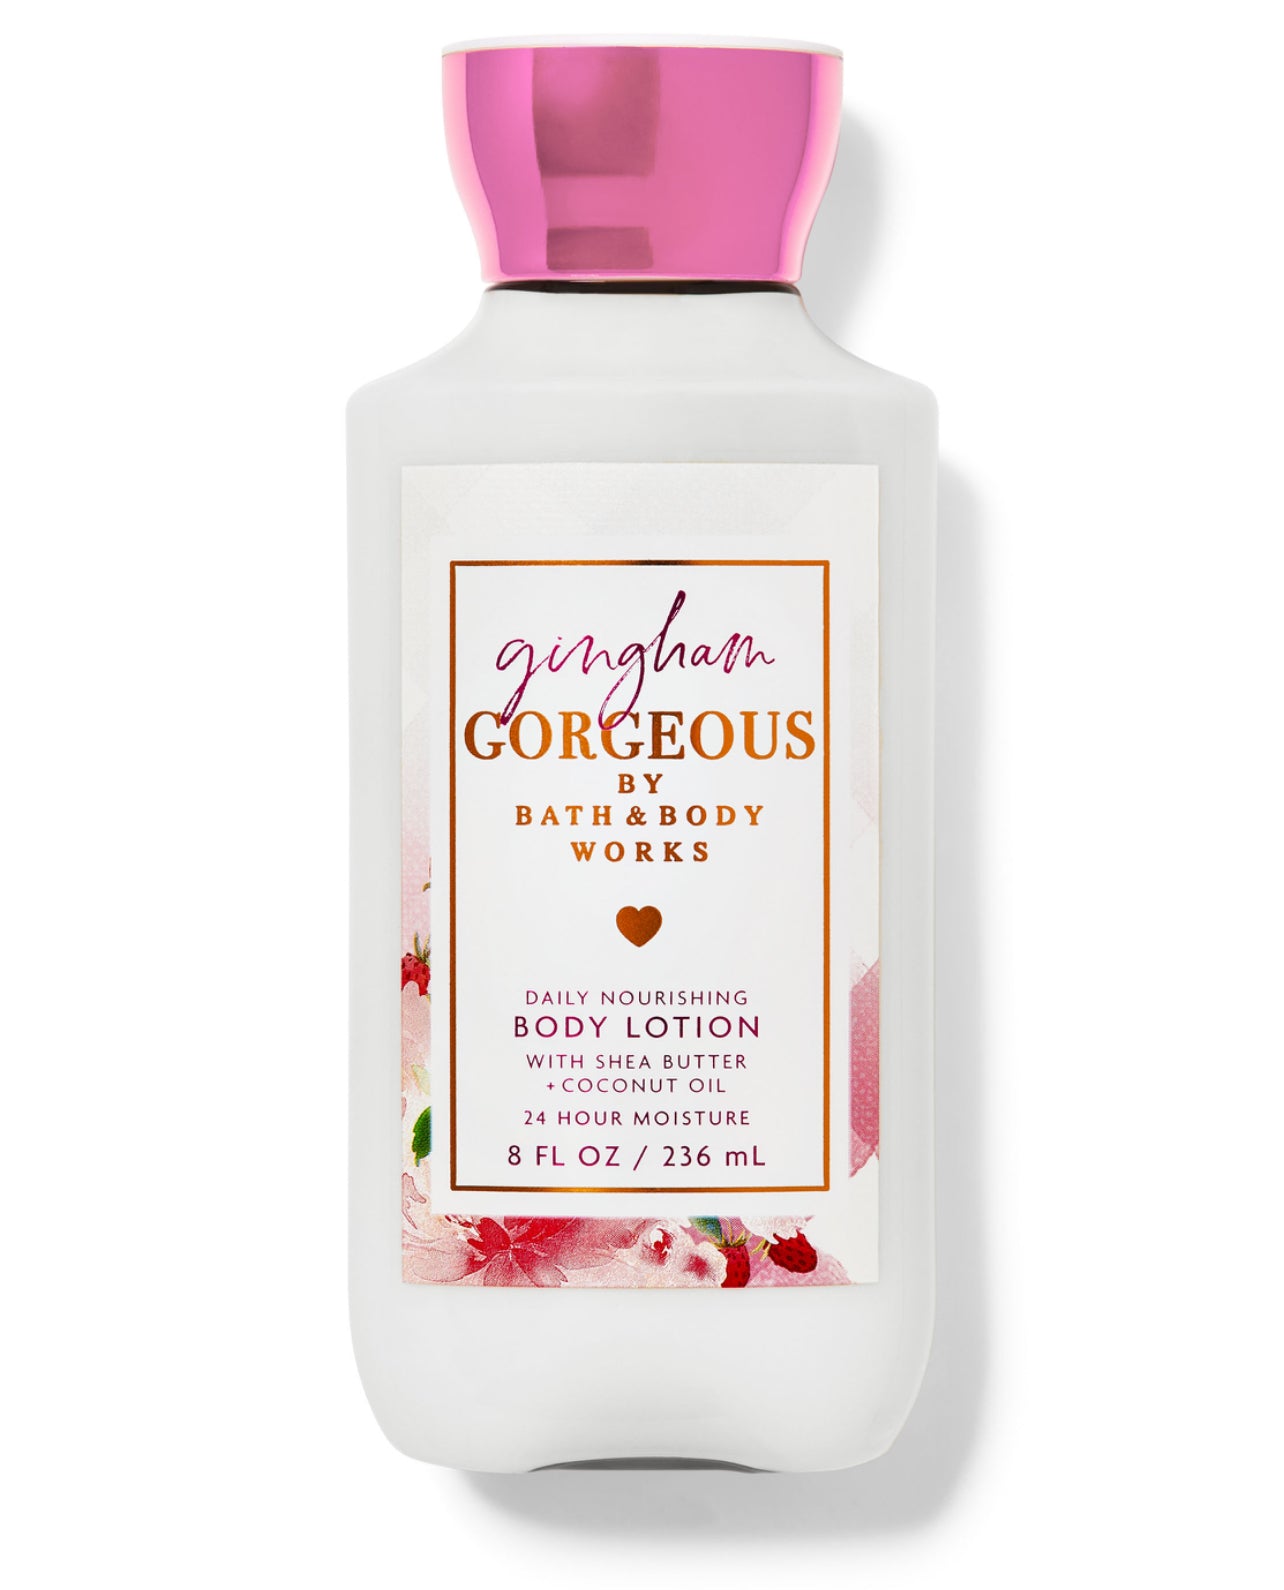 BATH AND BODY WORKS Gingham Gorgeous Daily Nourishing Body Lotion With Shea Butter + Coconut Oil 24 Hours Moisture